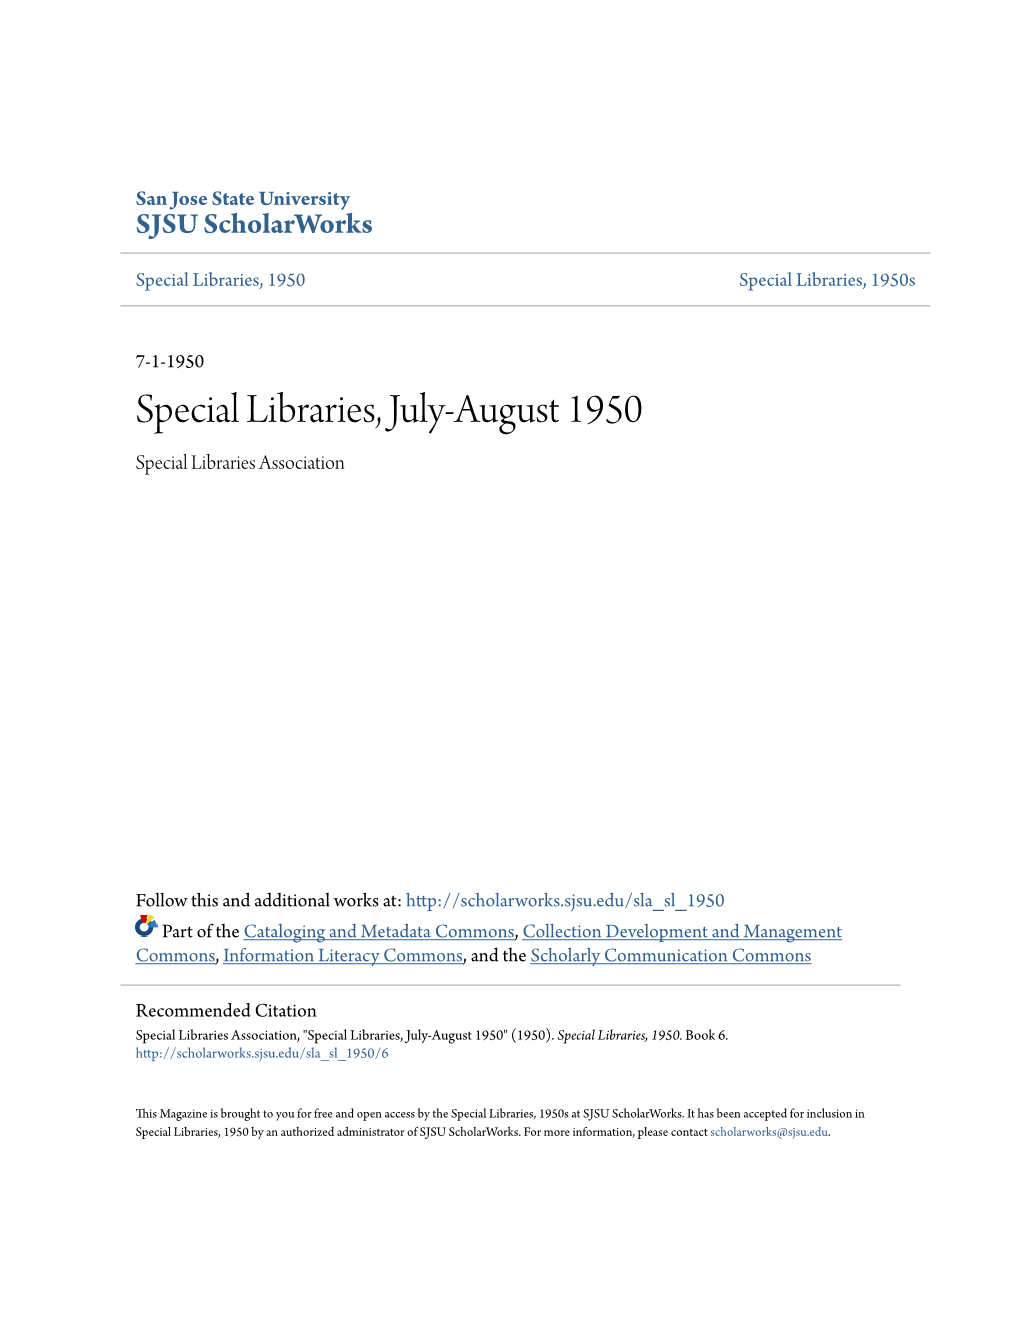 Special Libraries, July-August 1950 Special Libraries Association